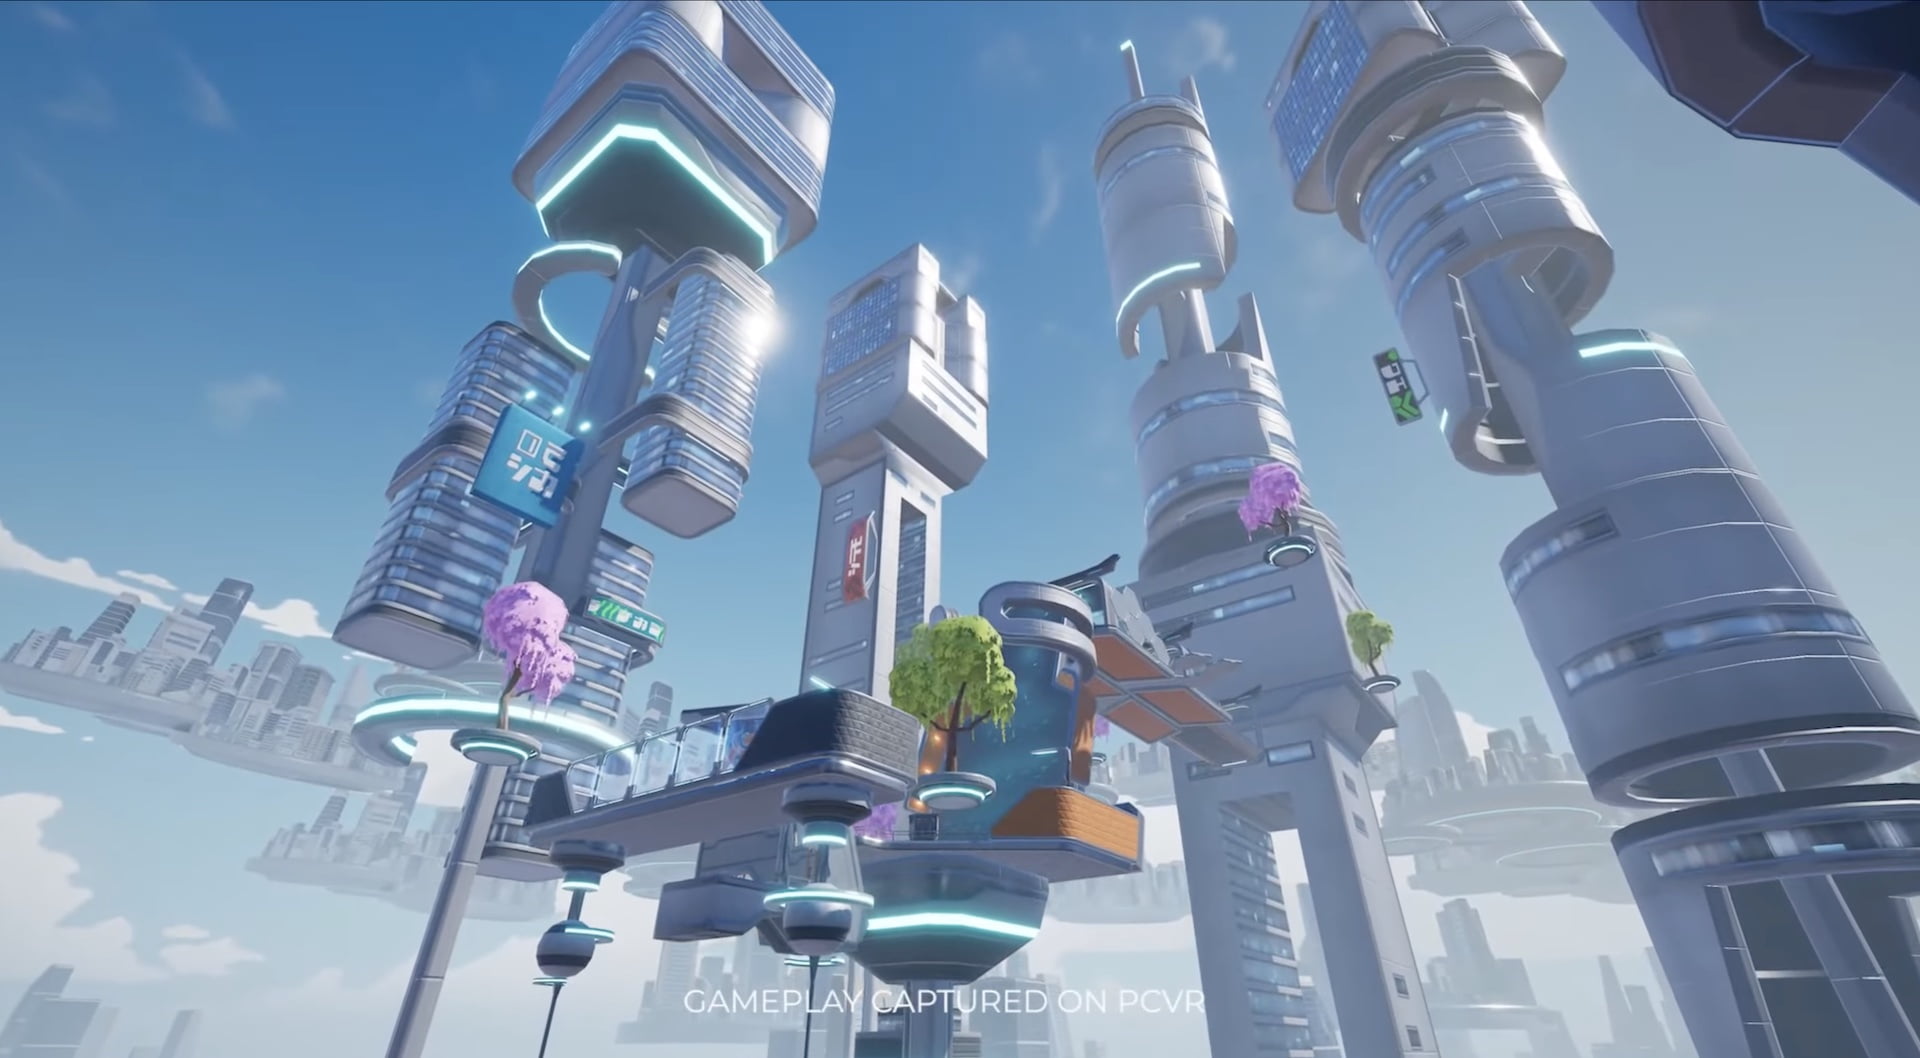 Playstation VR: "Super Kit" turns you into a parkour hero